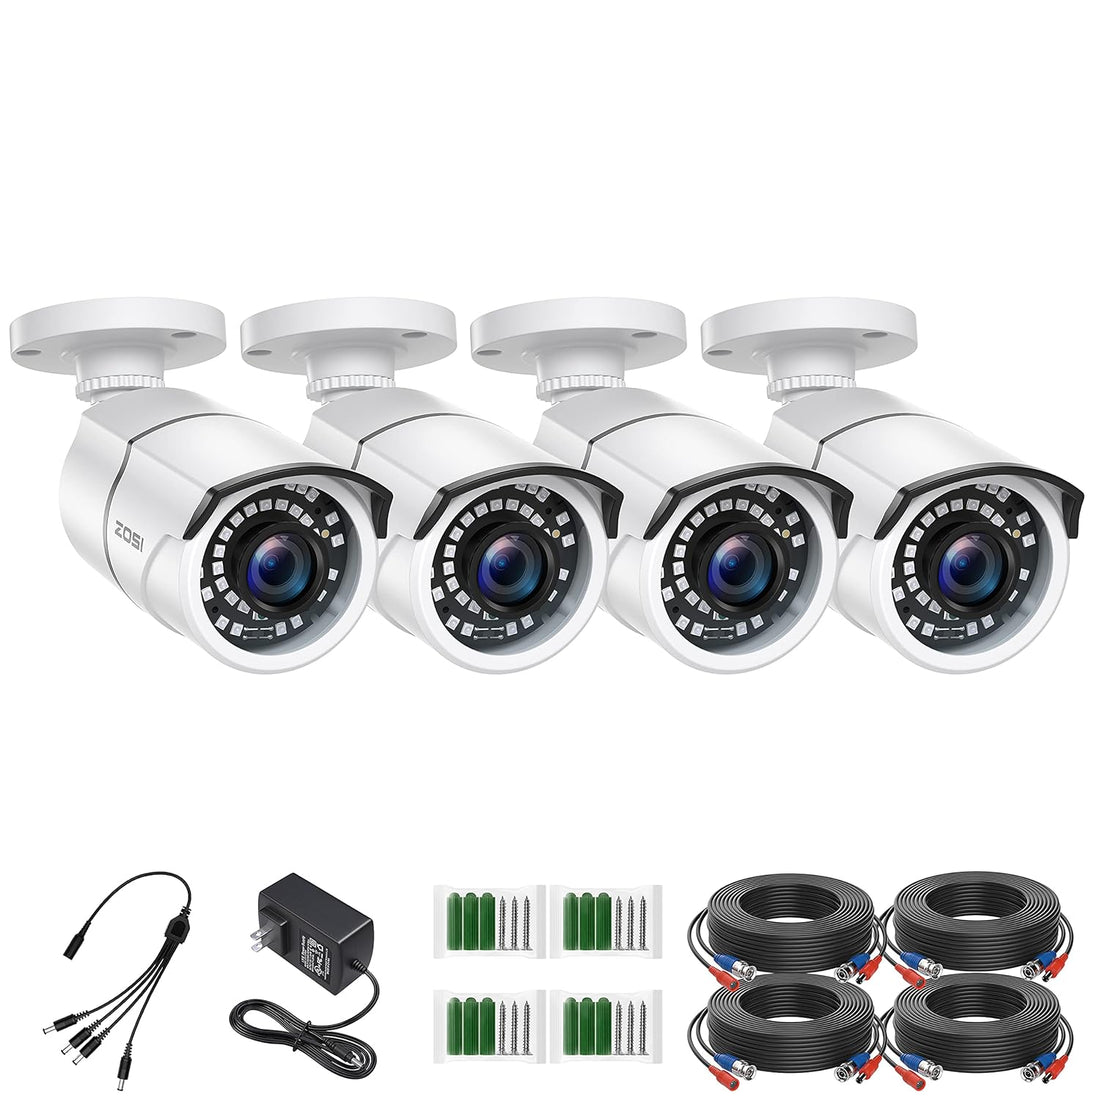 ZOSI 4 Pack HD-TVI 2.0MP 1080p Bullet Security Camera, Indoor/Outdoor Cameras Surveillance with Infrared and Night vision, Only Compatible with TVI Series DVRs